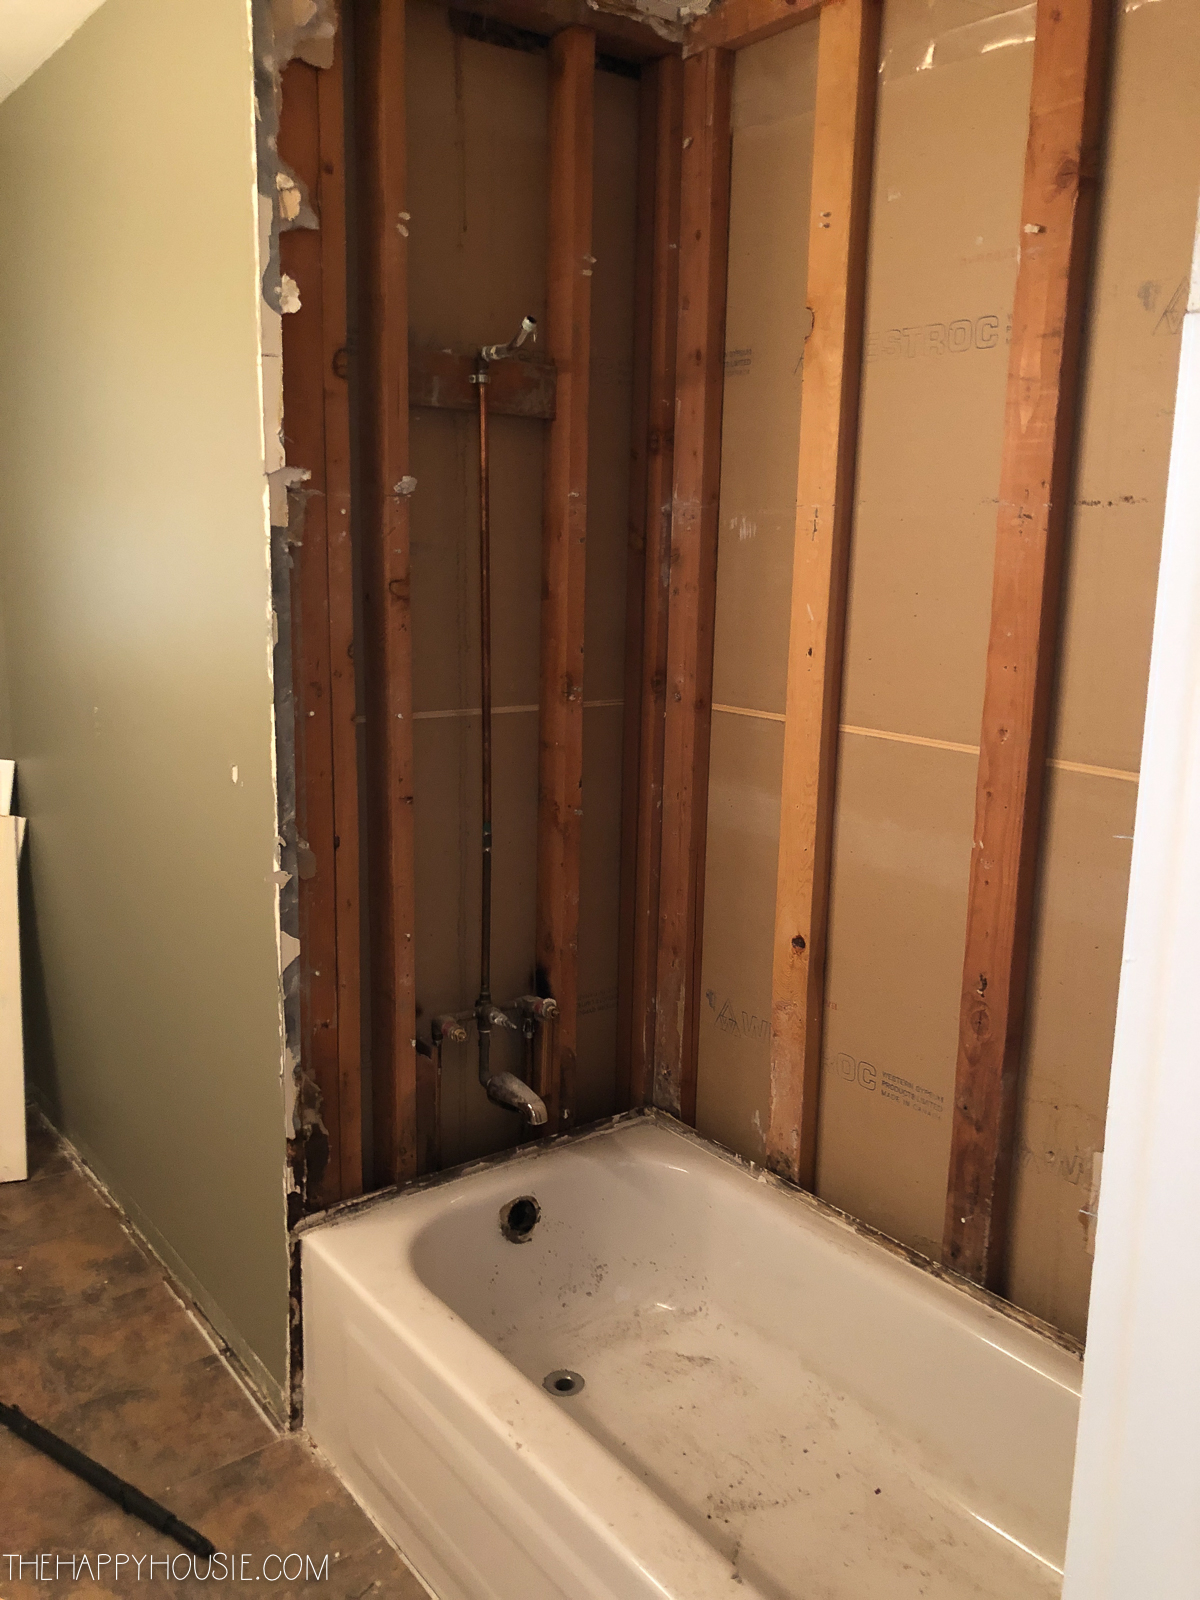 Looking at the bathroom after taking it apart for renovation.